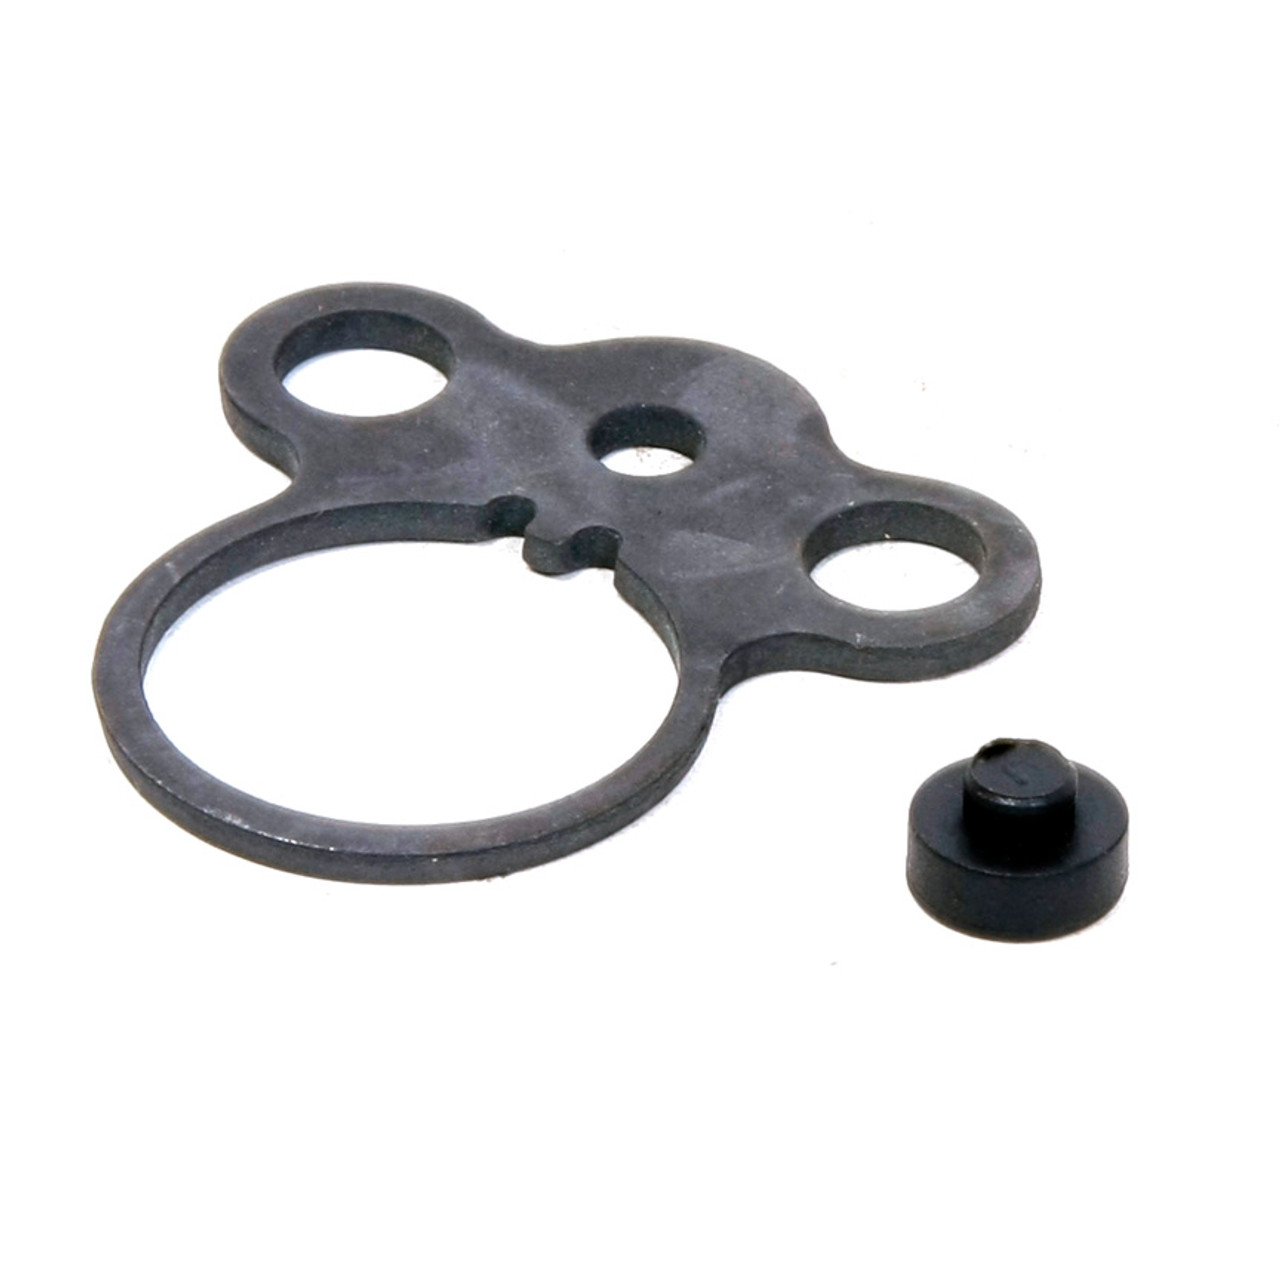 Ambidextrous Dual Loop Sling Attachment Plate - Steel